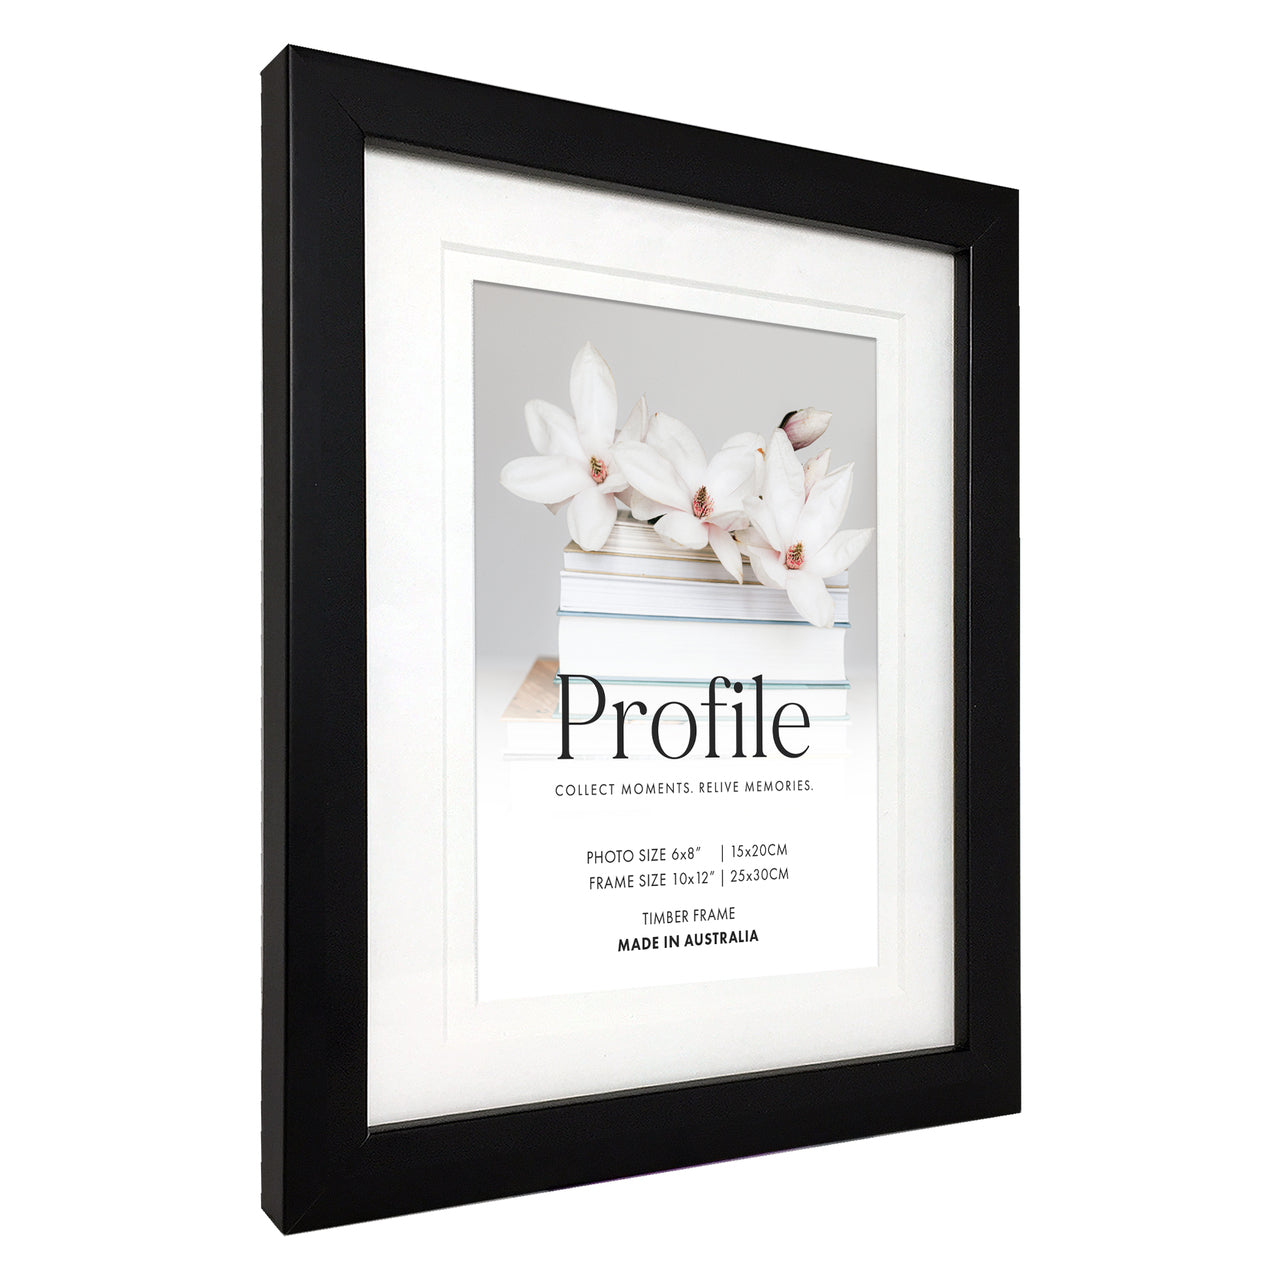 Deluxe Matt Black 6x8 Photo Frame with 4x6 opening